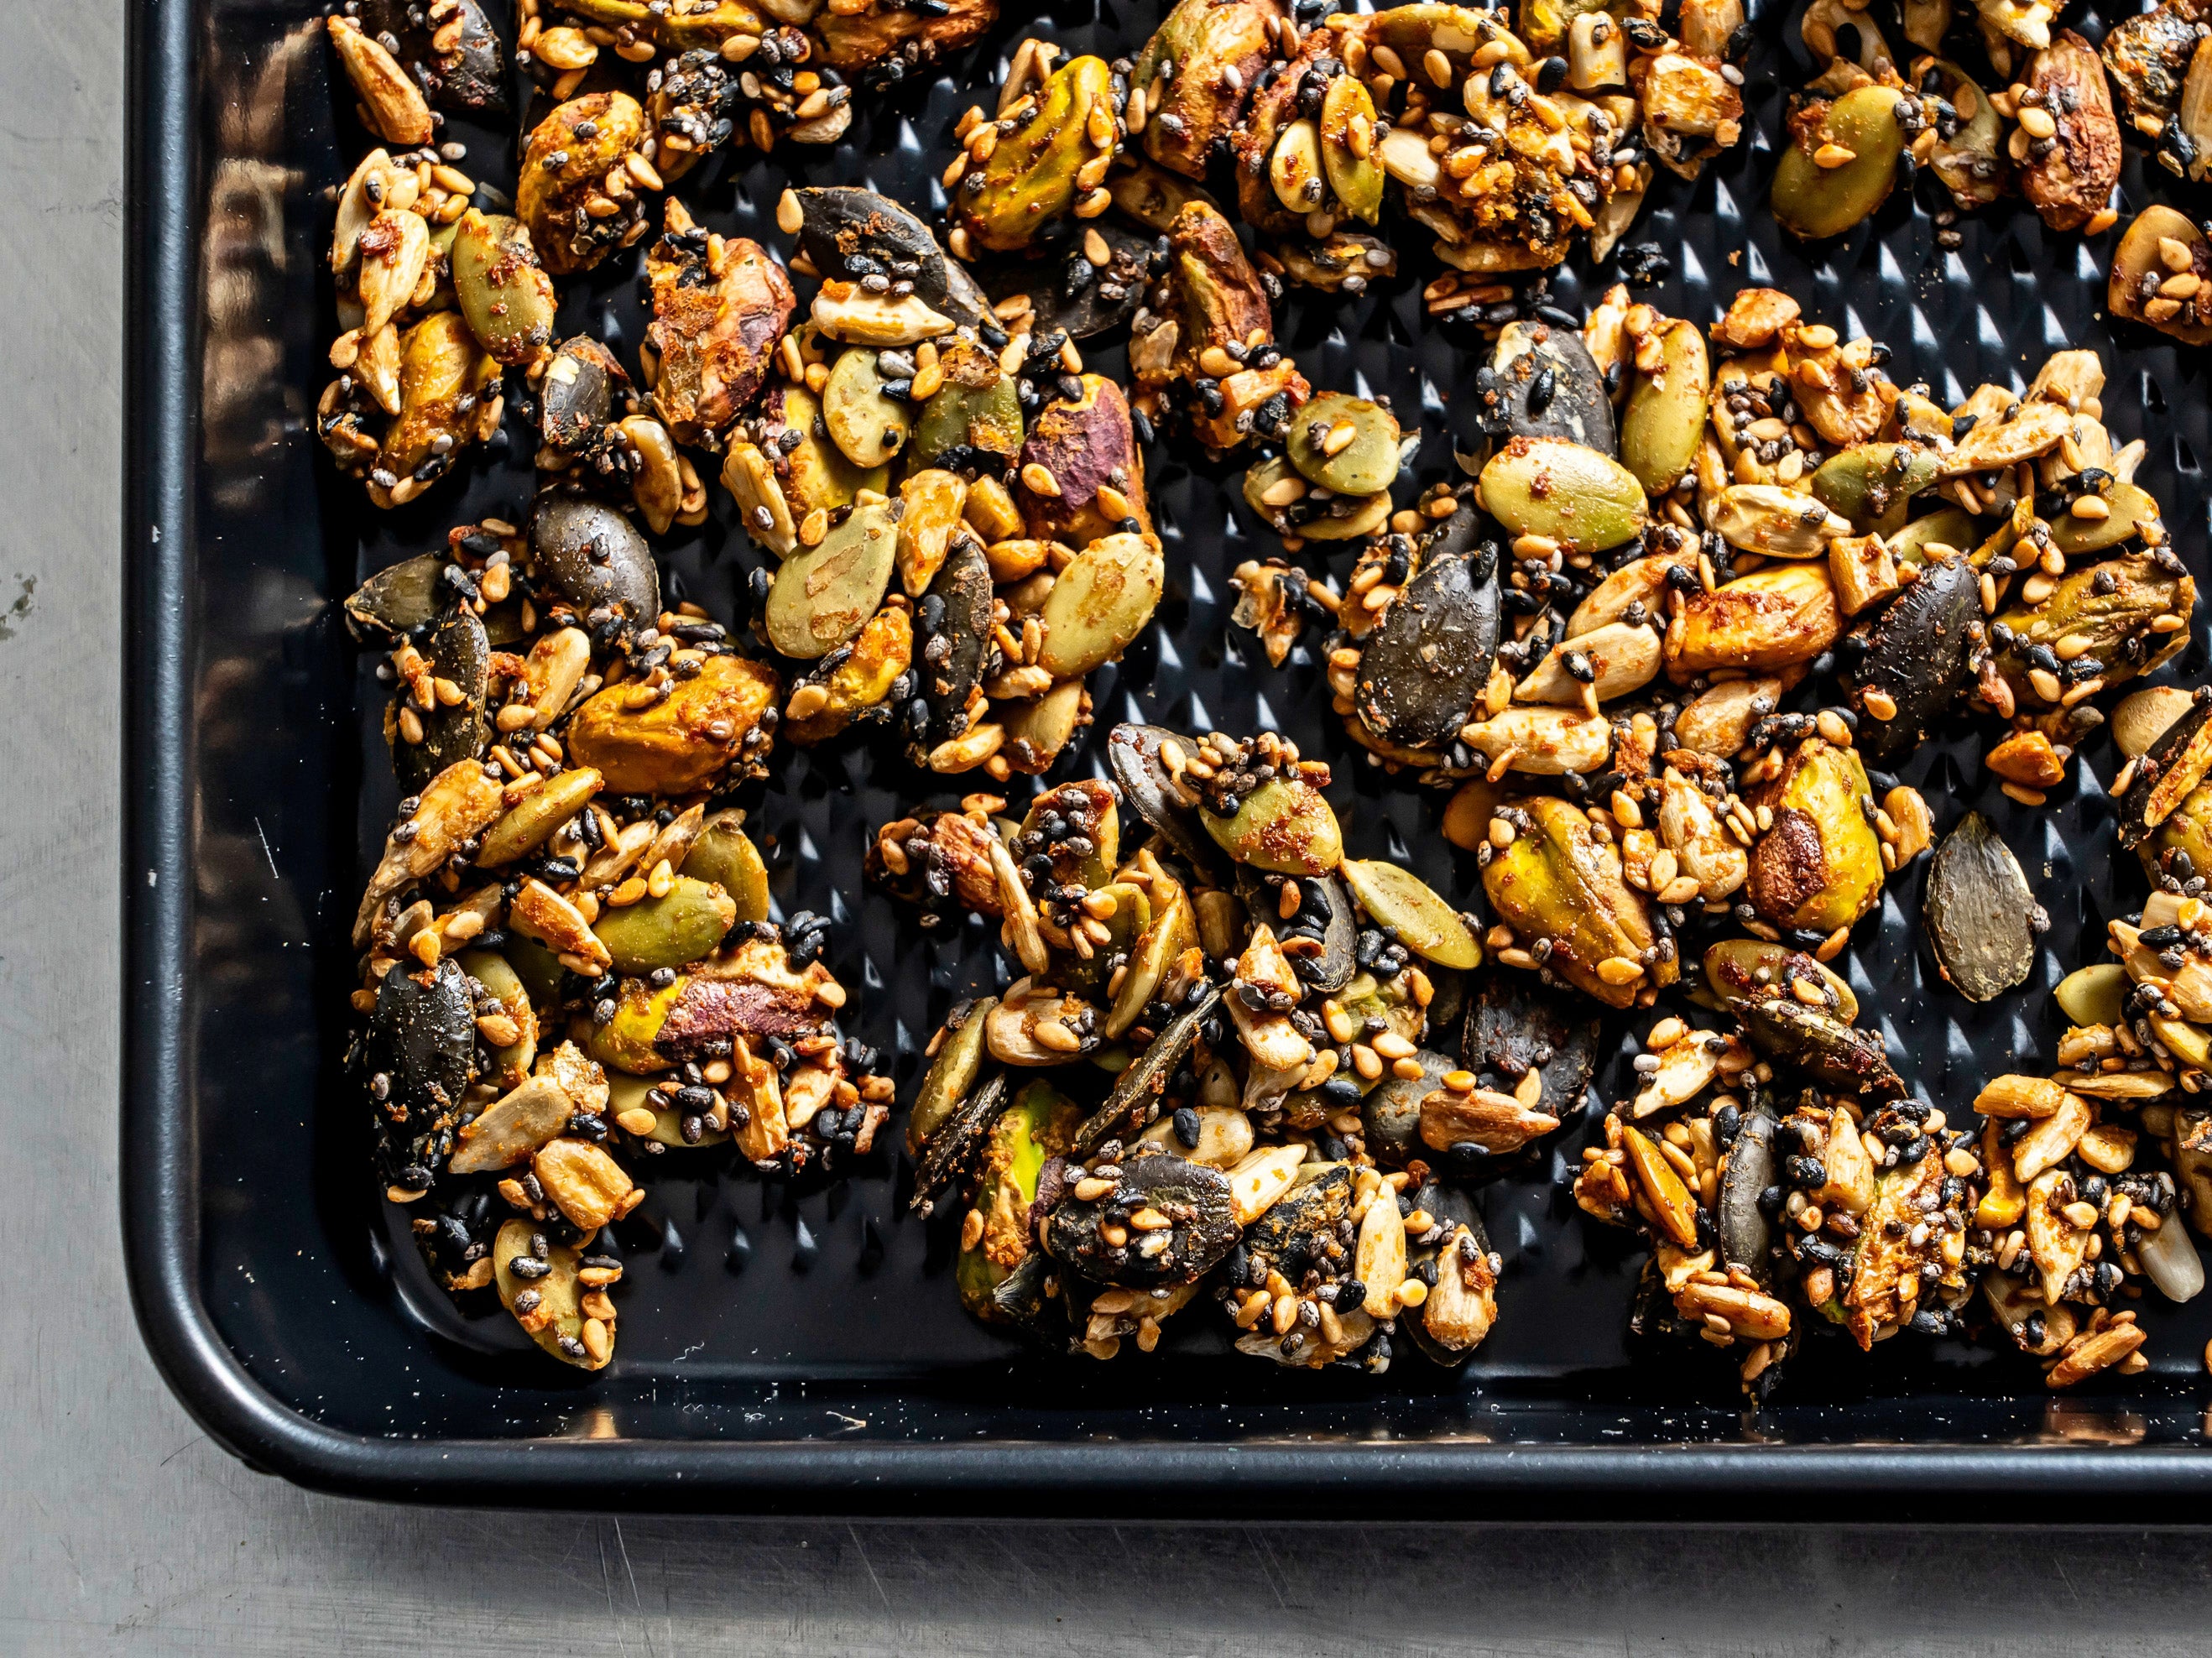 Sprinkle these flavourful and irresistible seed-and-nut clusters on your salad, soups, grain bowls and avocado toast for added crunch